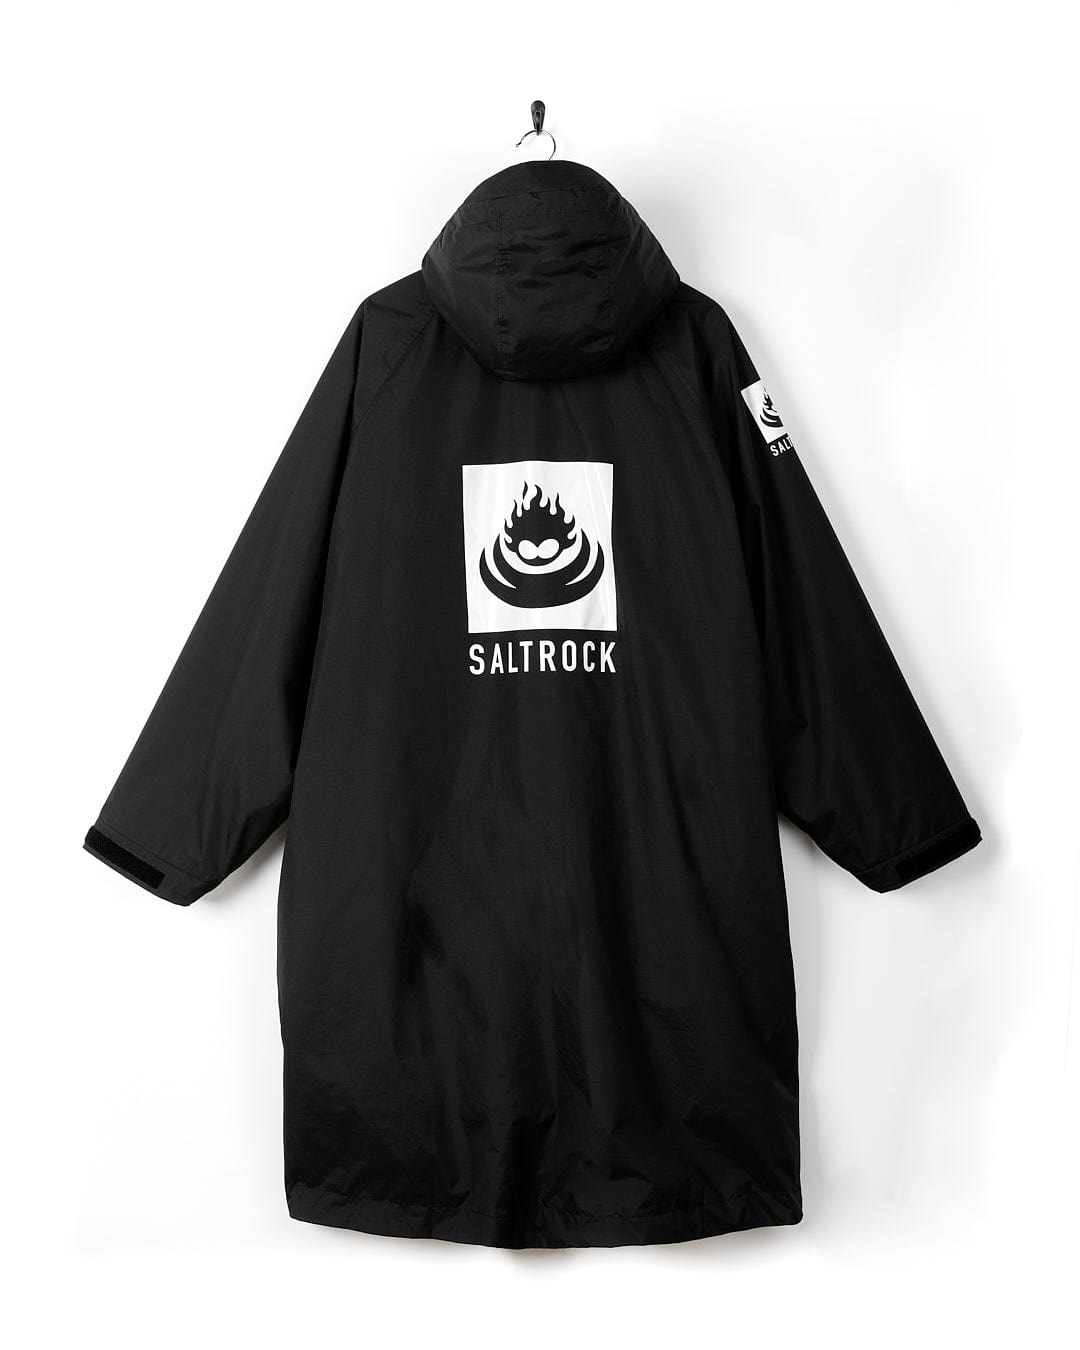 A Saltrock Four Seasons - Waterproof Changing Robe - Black/Blue with a logo on it.